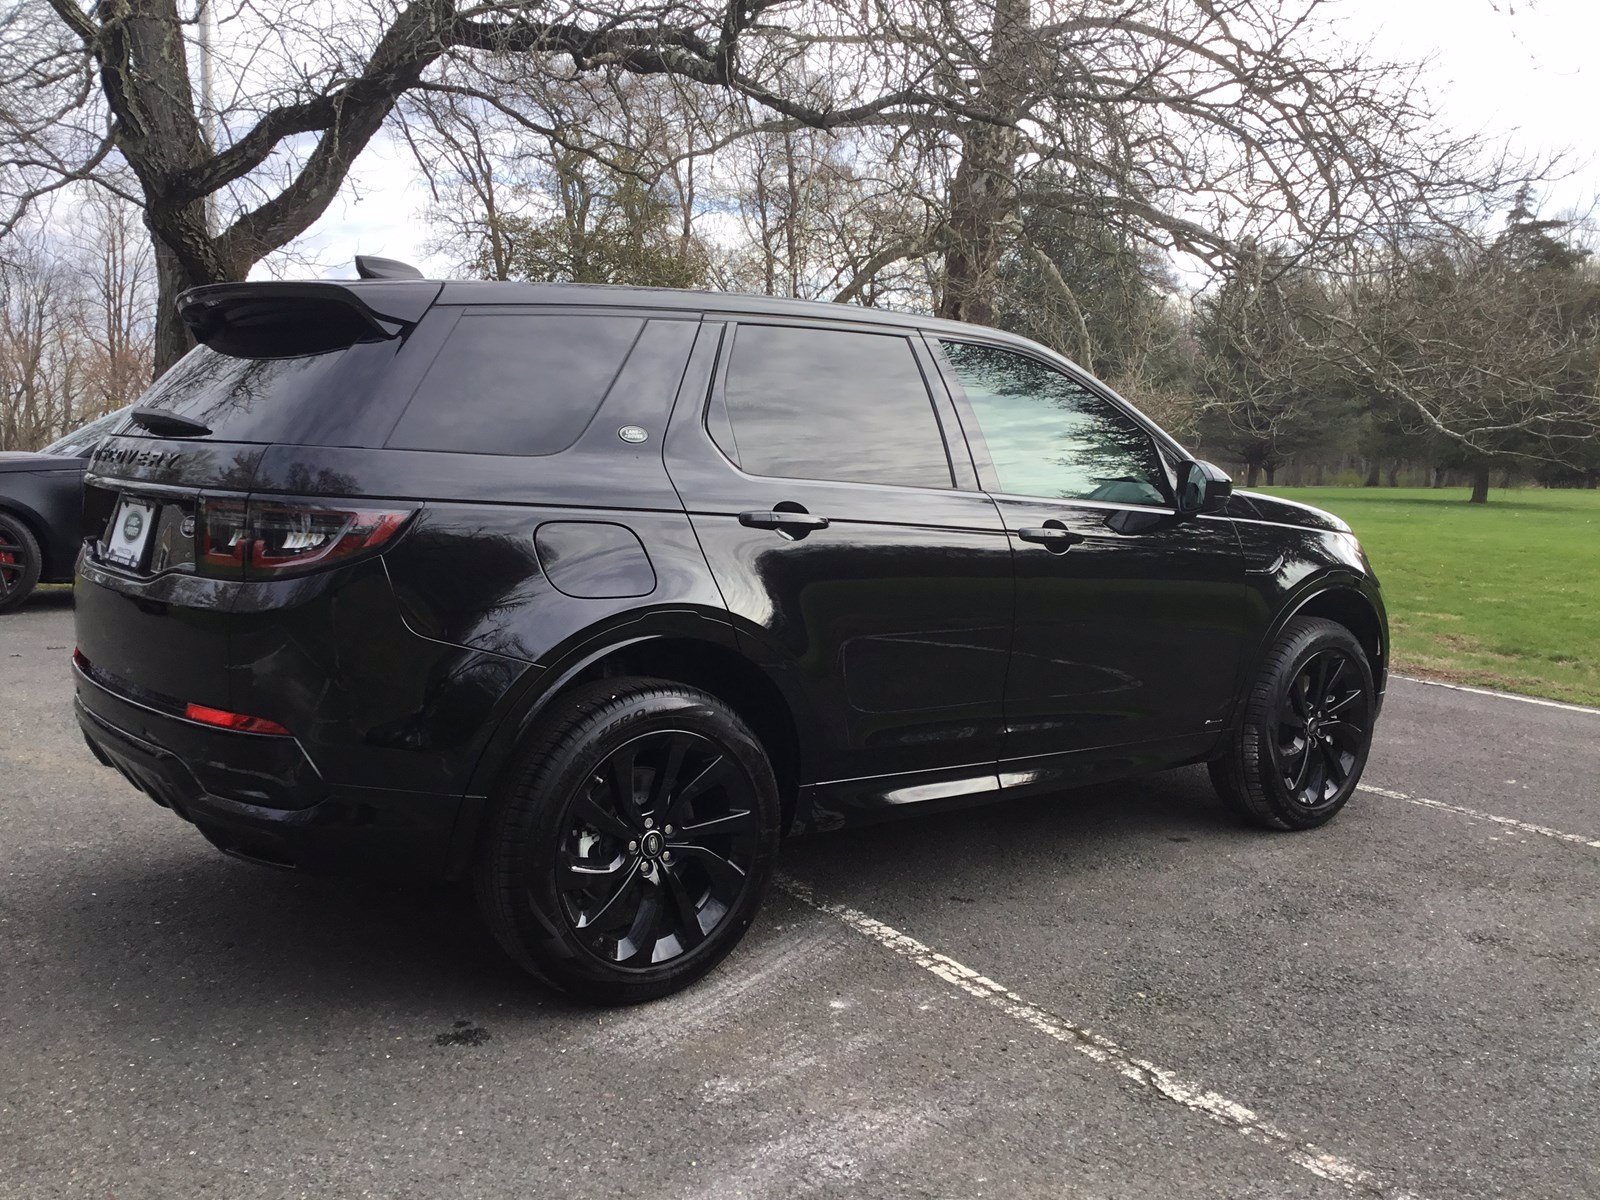 New 2020 Land Rover Discovery Sport HSE RDynamic 4 Door